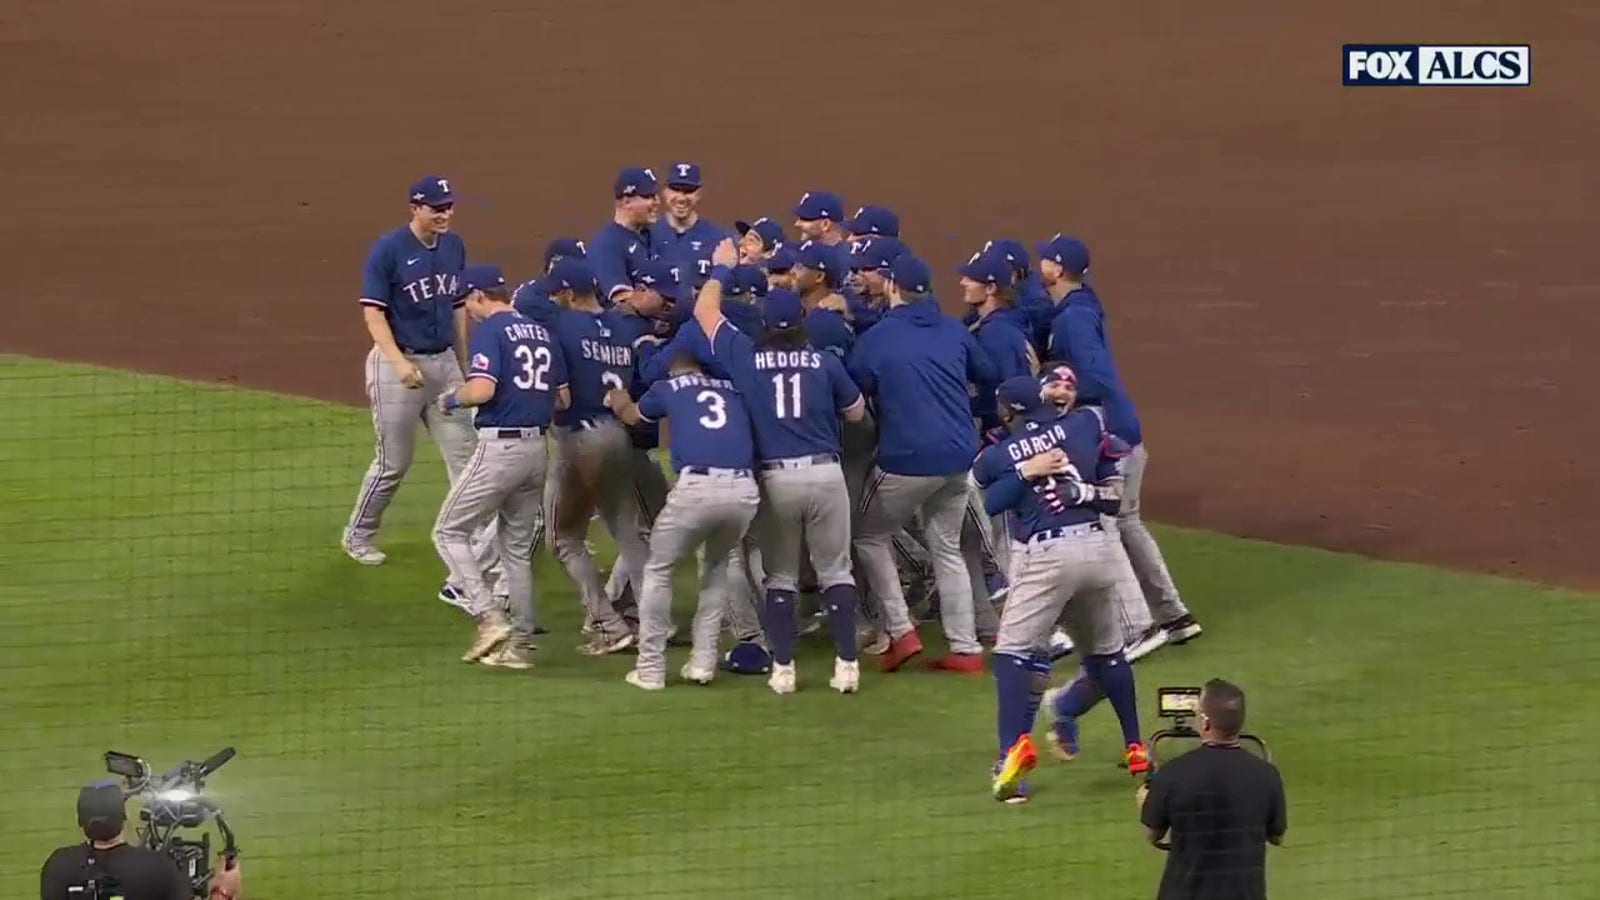 Rangers win third pennant in franchise history after José Leclerc gets Kyle Tucker to ground out